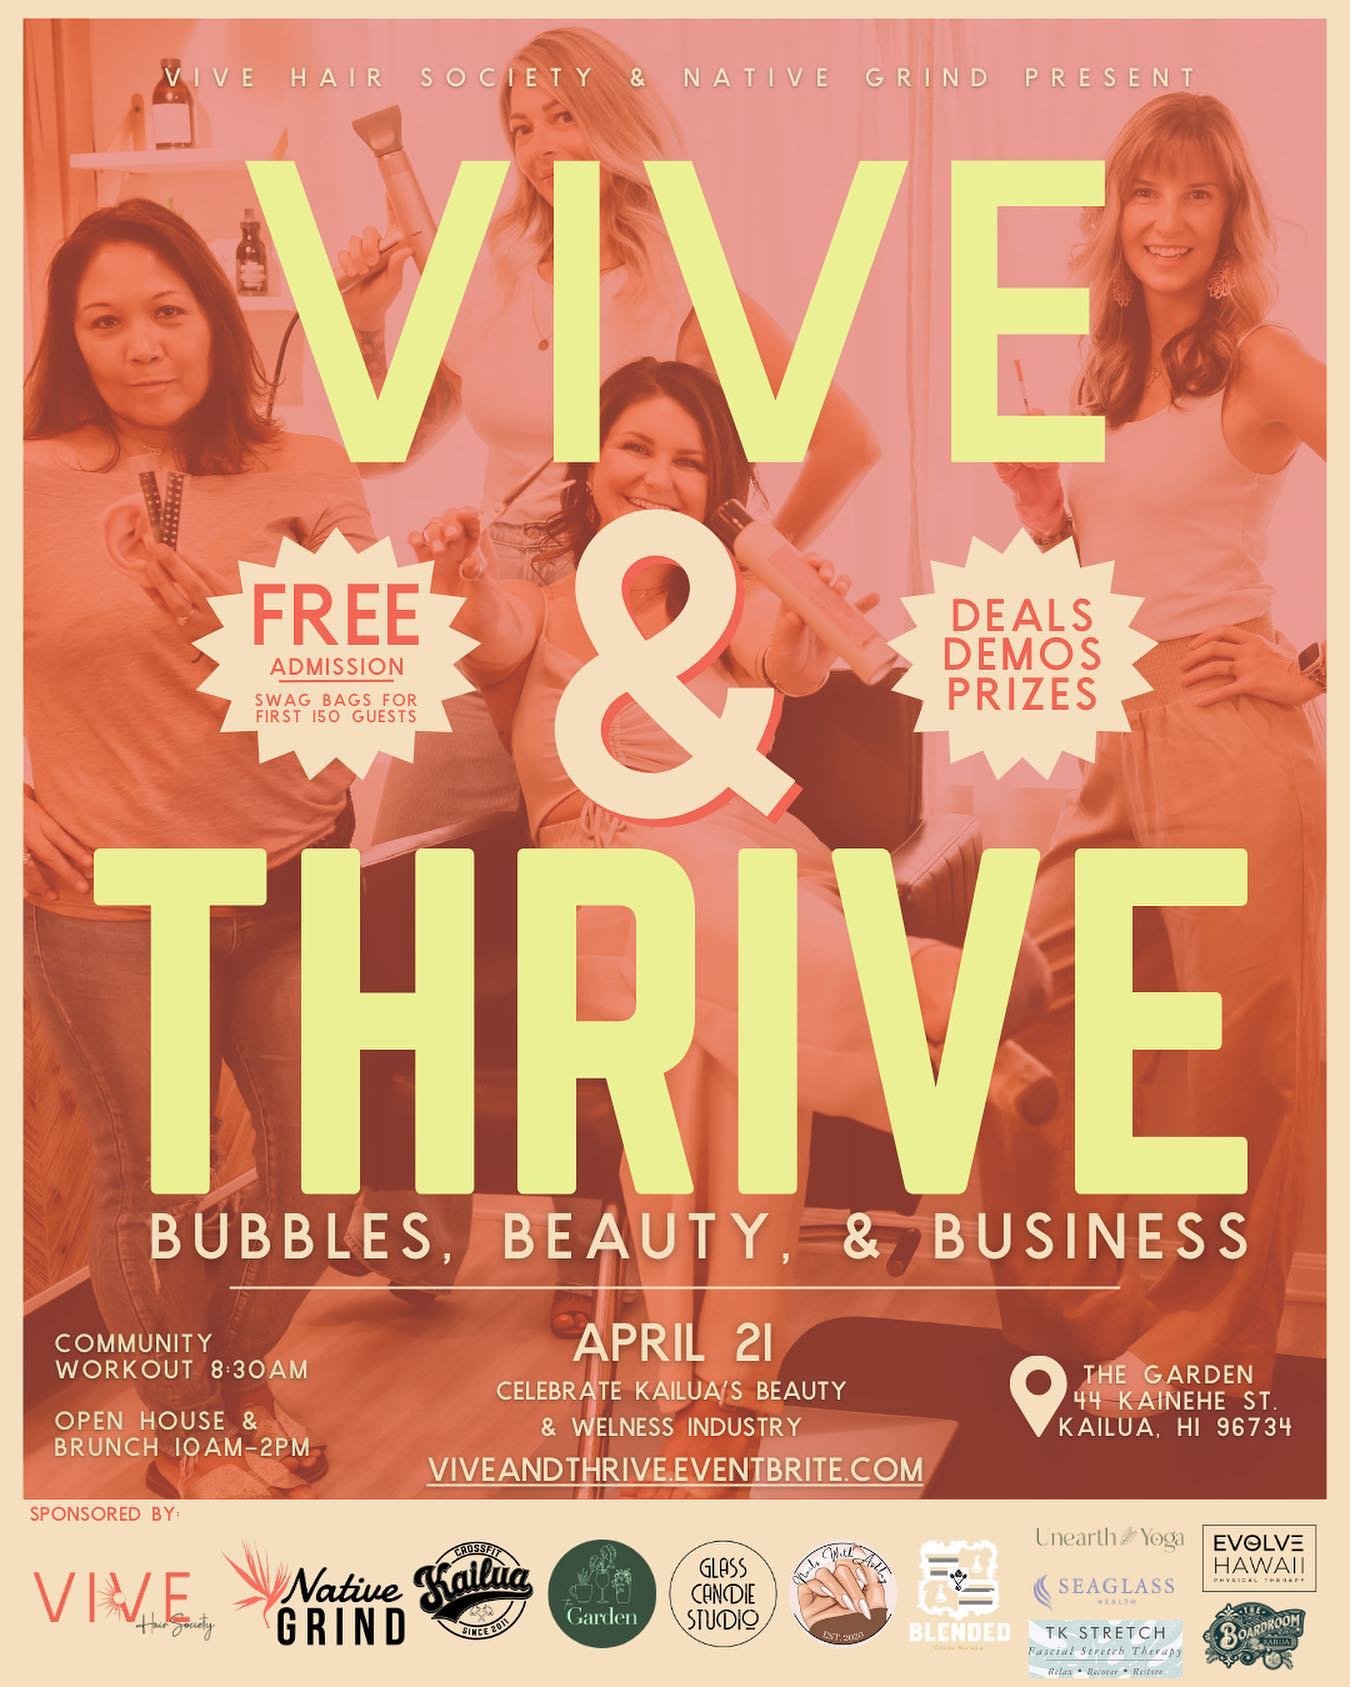 VIVE @vive.hairsociety located at The Garden at Boardroom, is bringing together some of our favorite Kailua small businesses for a vibrant event focused on beauty, wellness, and connection in celebration of VIVE&rsquo;s one-year anniversary!

Open to